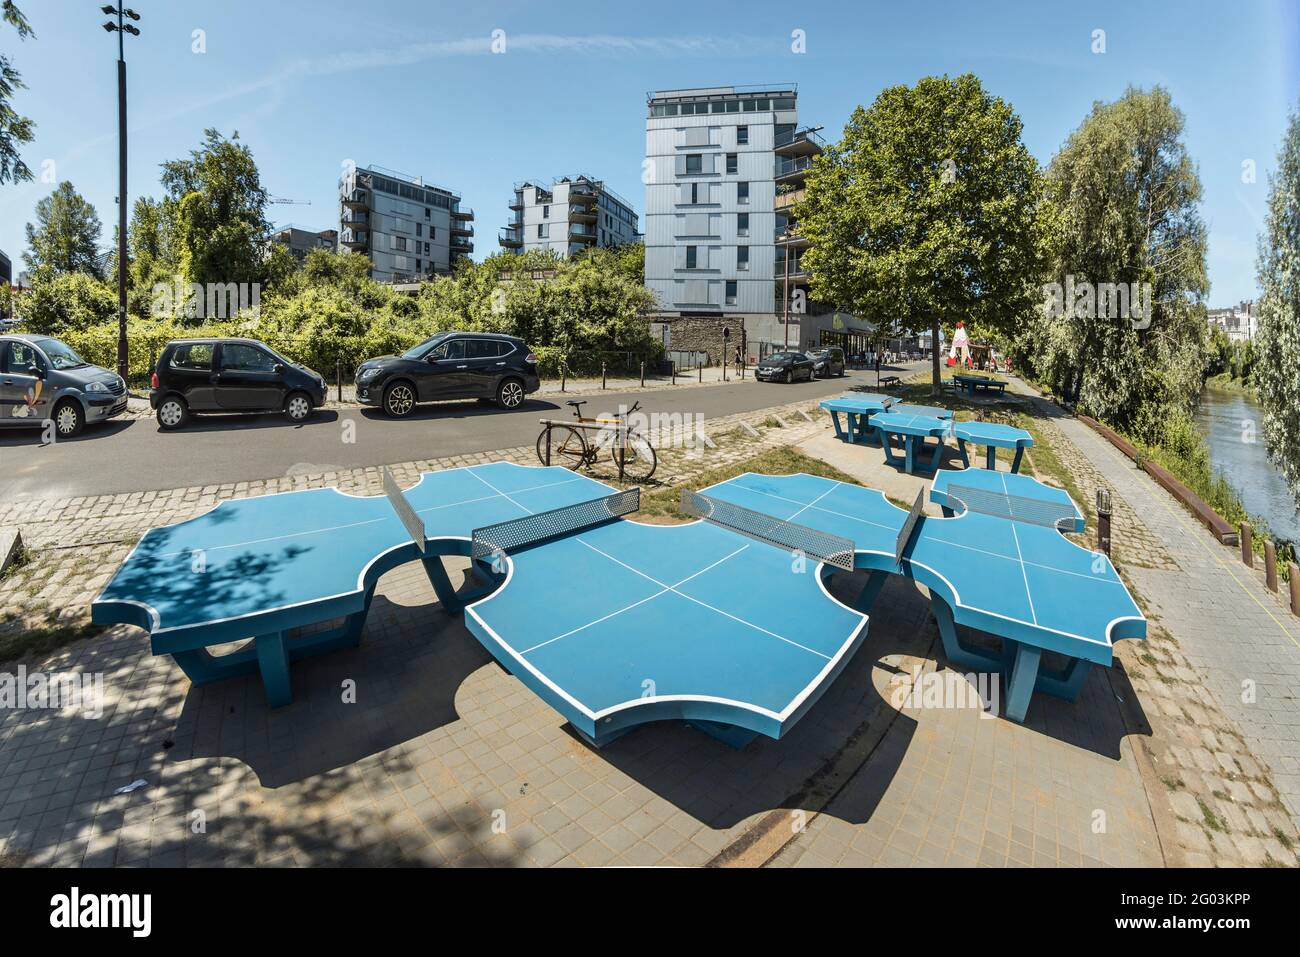 FRANCE - LOIRE ATLANTIQUE (44) - NANTES - ILE DE NANTES, NEW DISTRICT:  ARTISTIC WORK INSTALLED BY THE VOYAGE A NANTES NAMED PING PONG TABLES Stock  Photo - Alamy